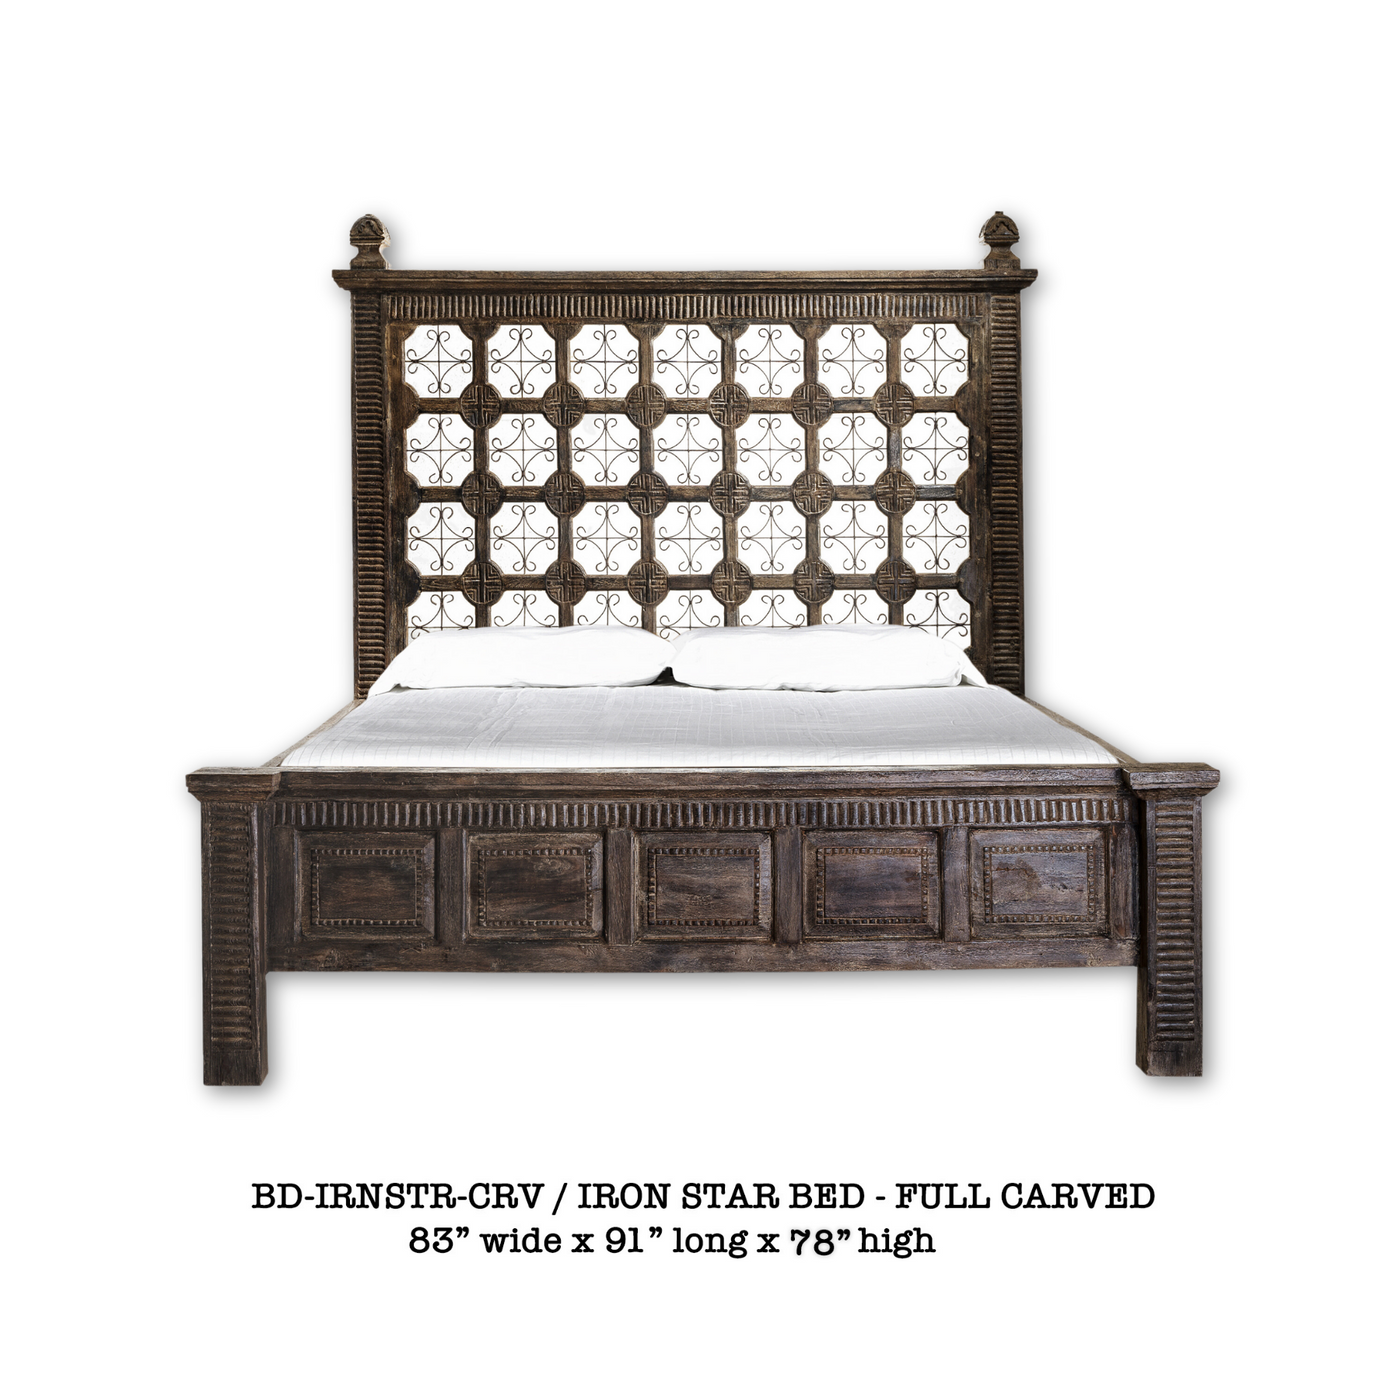 Iron Star King Bed With Full Carving